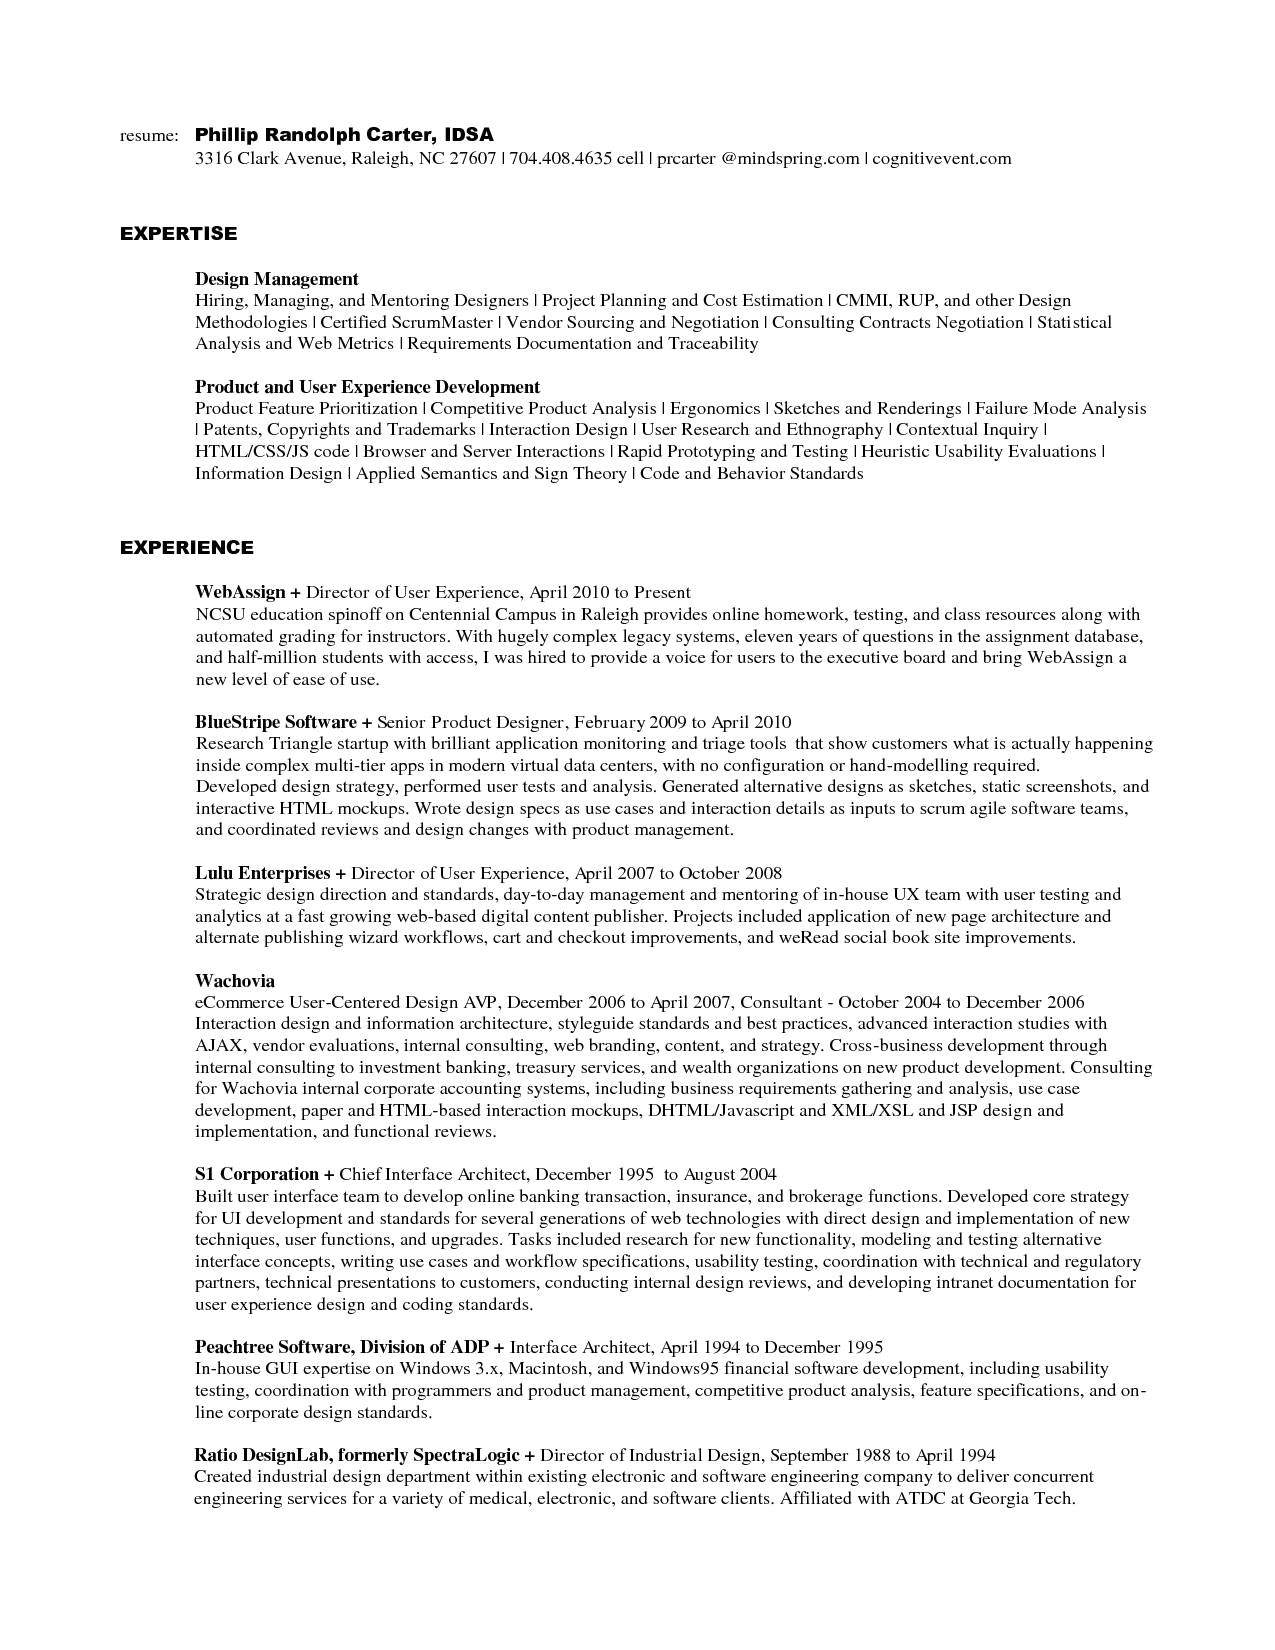 software testing resume samples 2 years experience